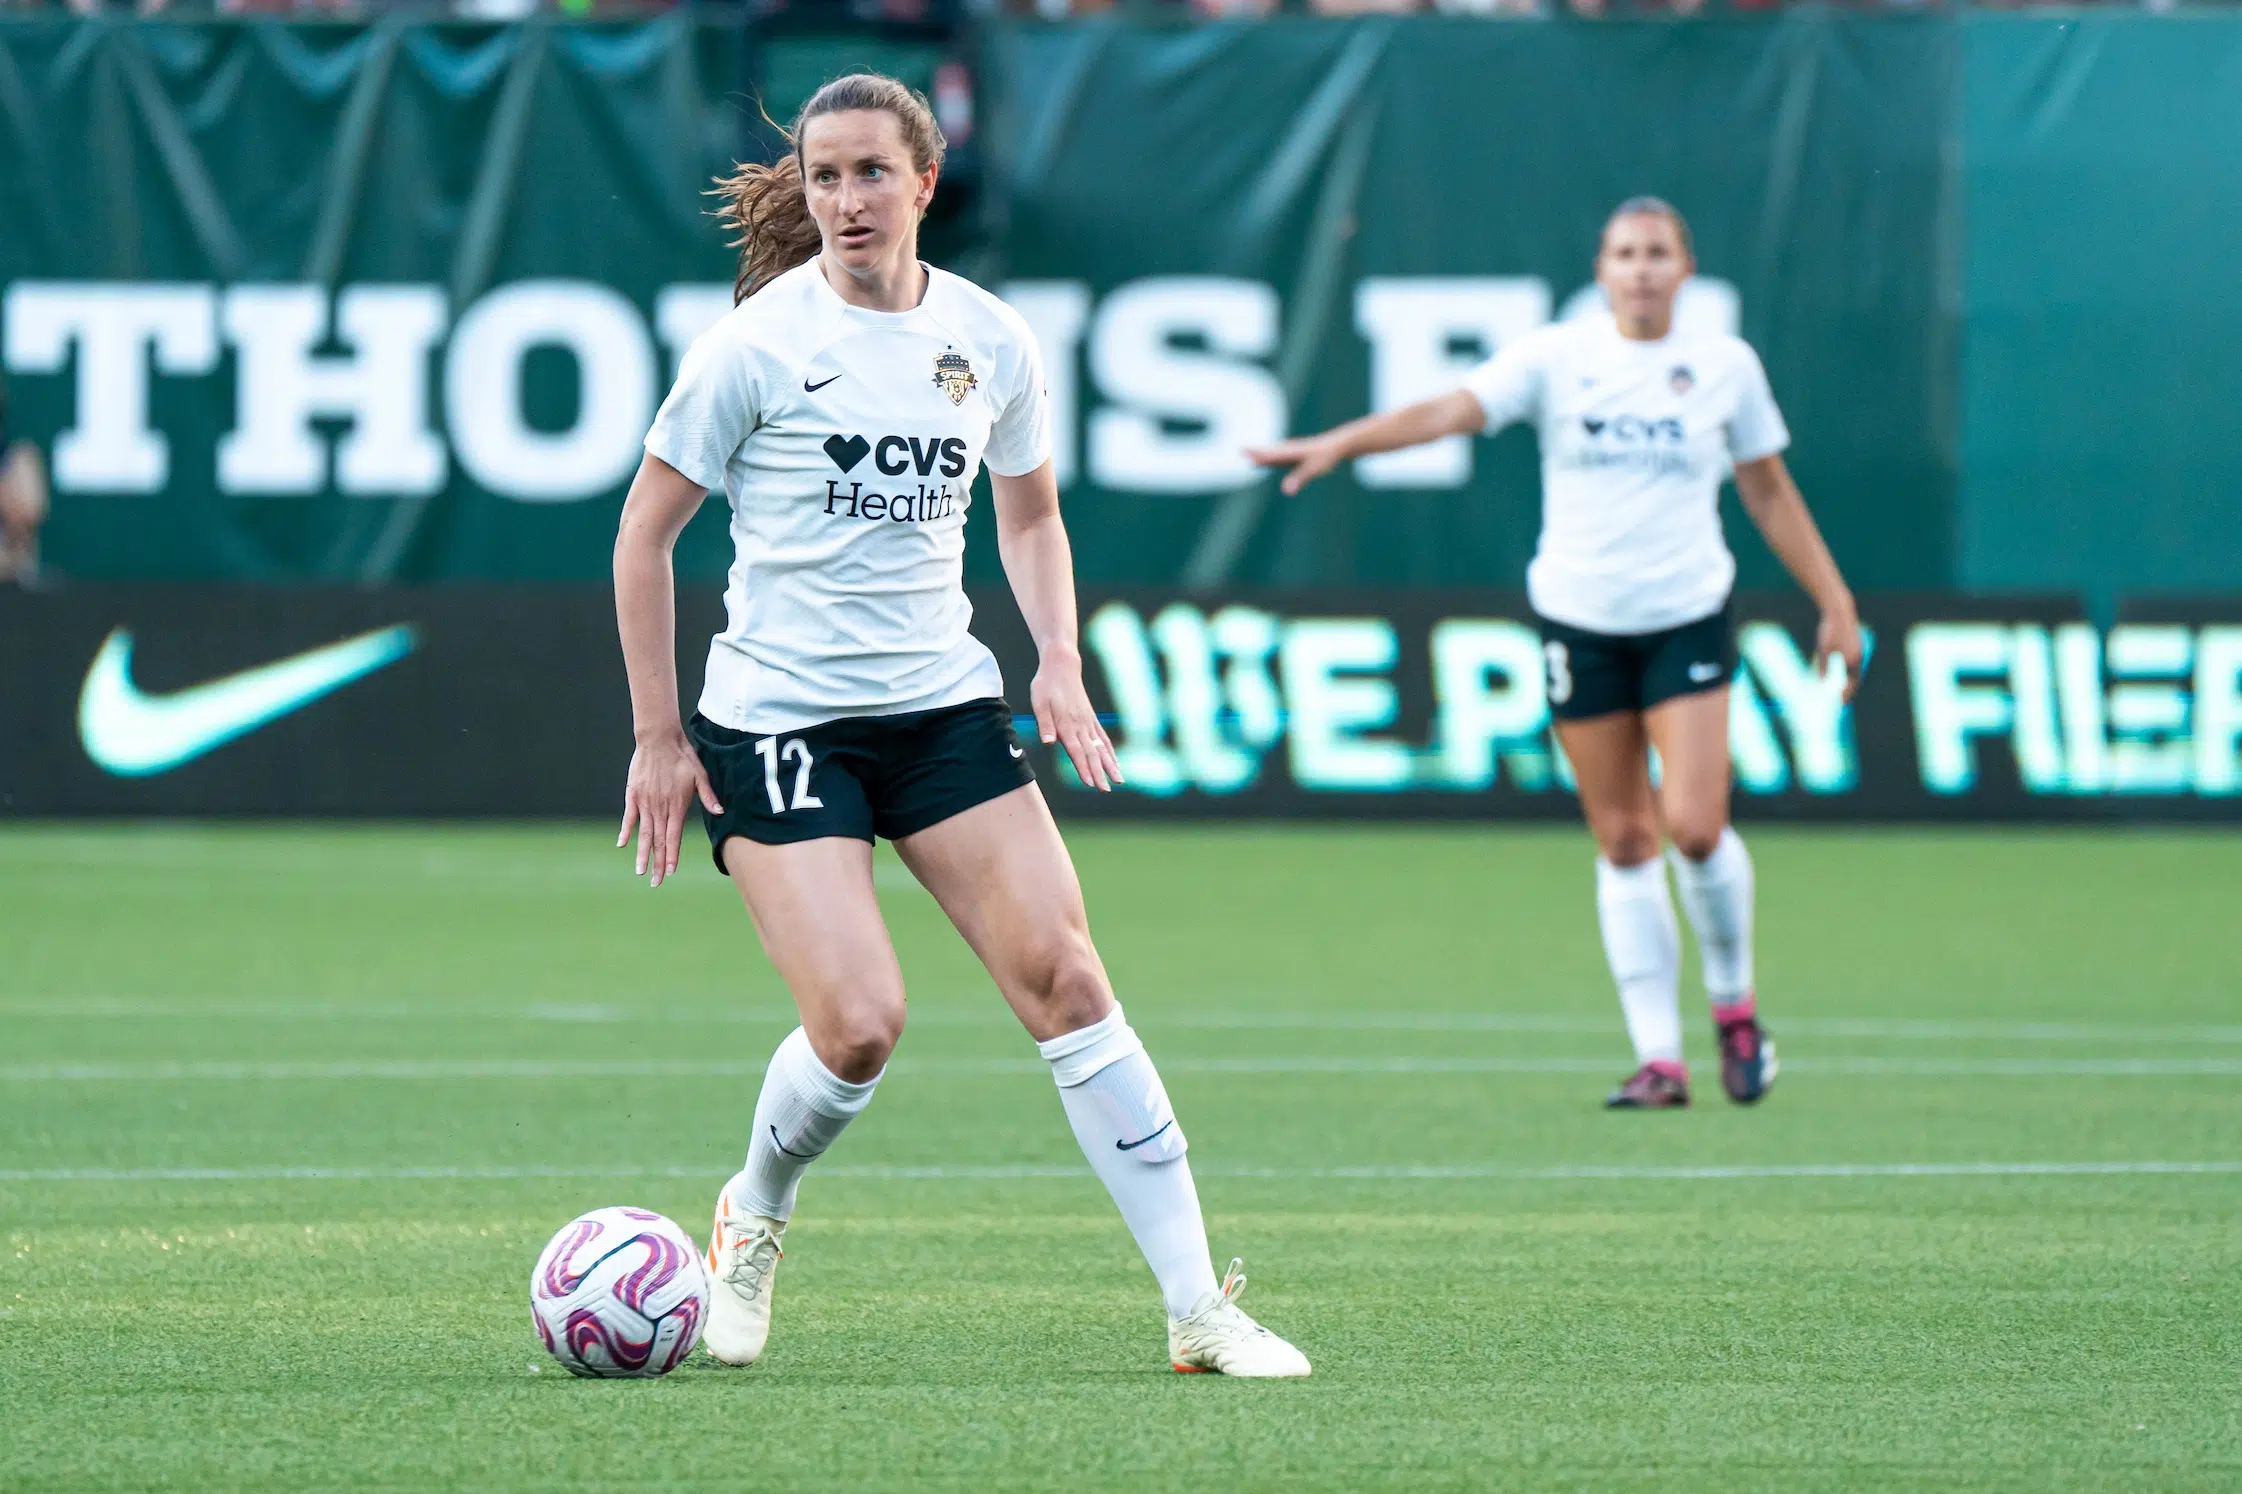 Andi Sullivan surveys the field while dribbling a soccer. She is wearing a white top, black shorts, and white socks.